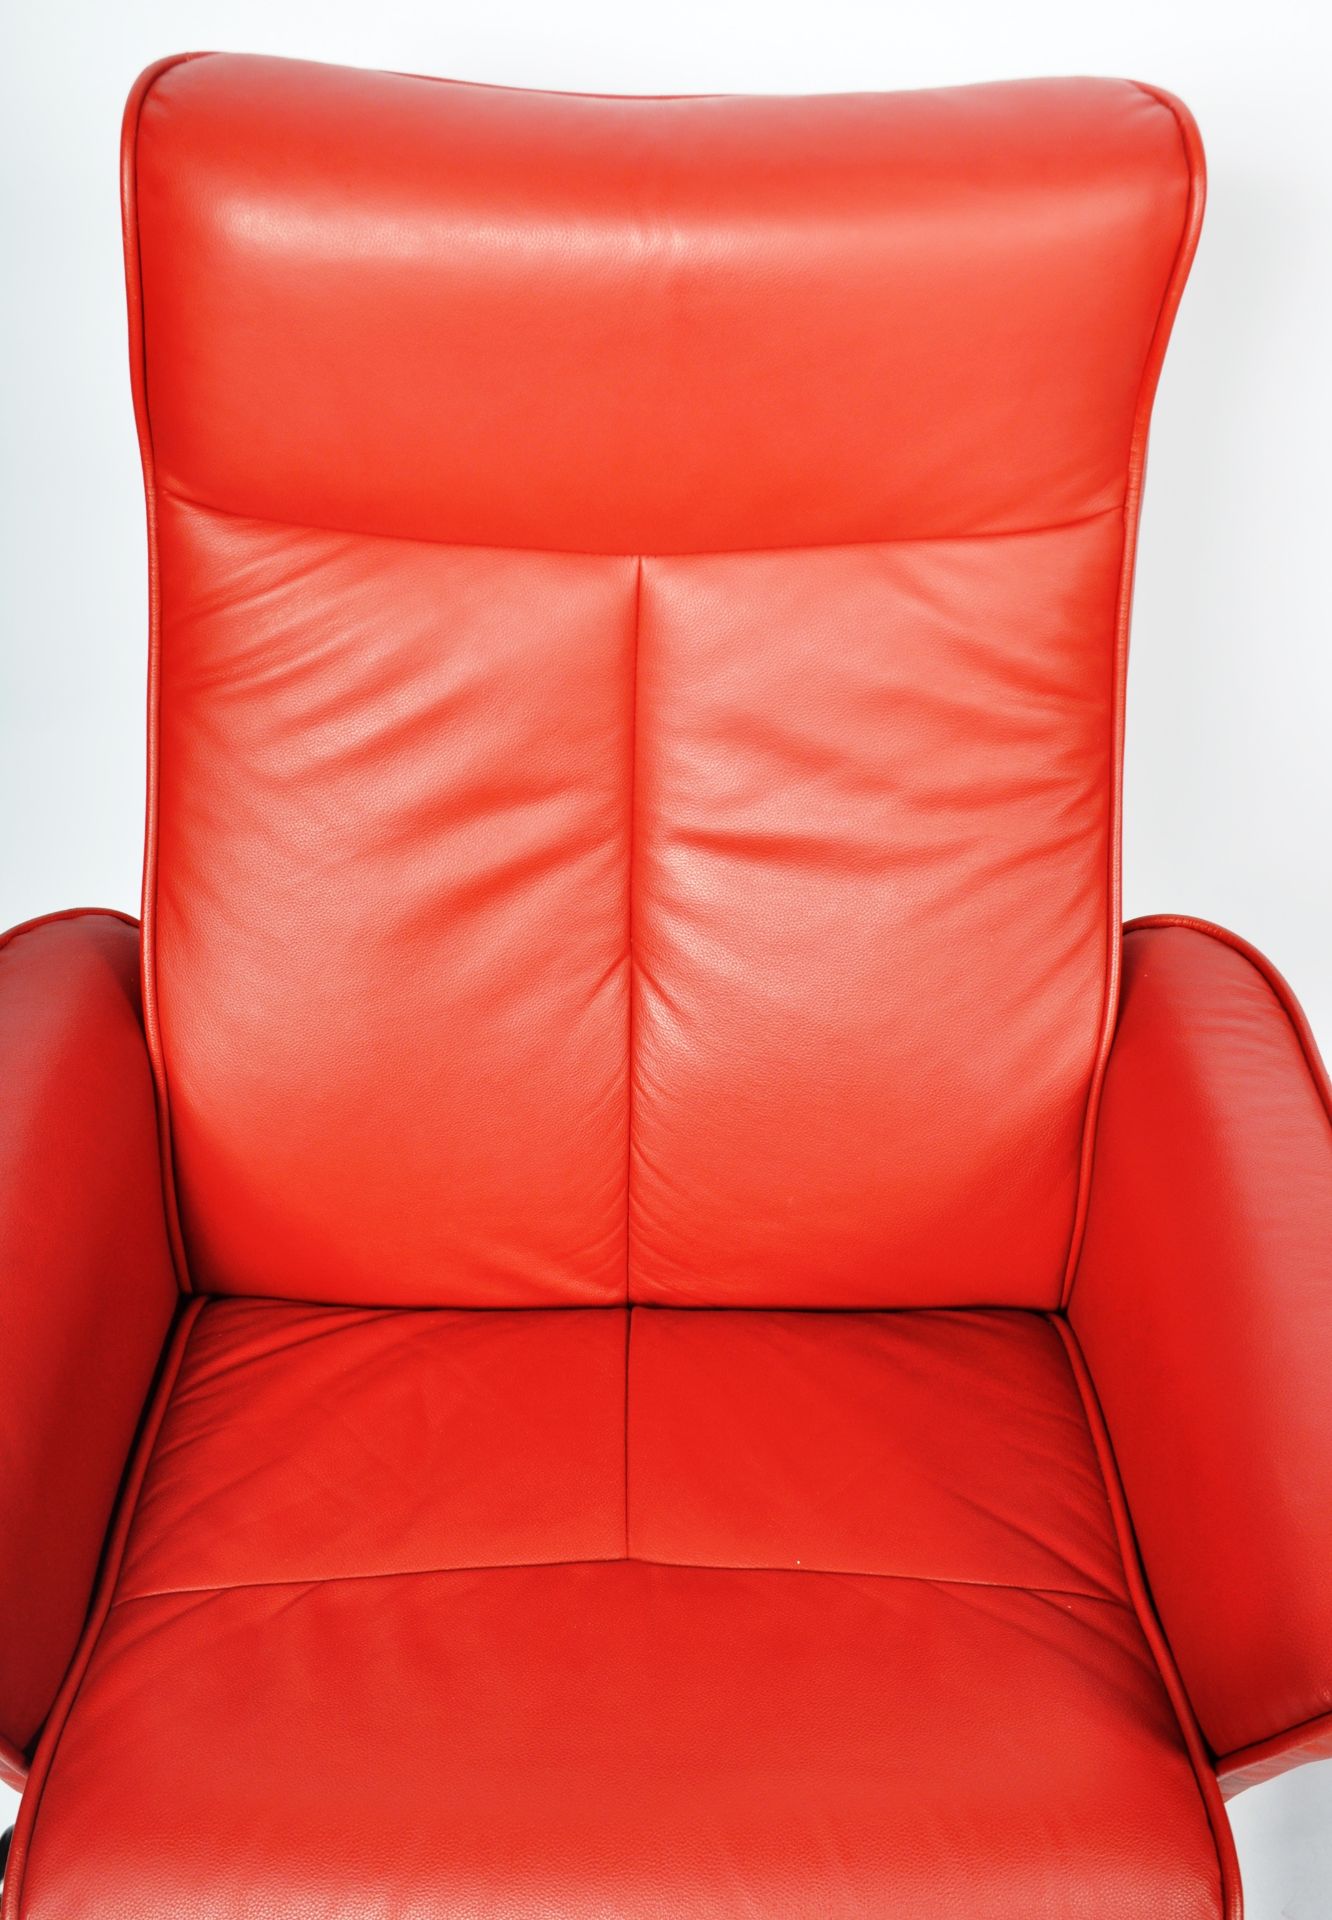 G PLAN - CONTEMPORARY RED LEATHER RECLINING SWIVEL ARMCHAIR - Image 3 of 7